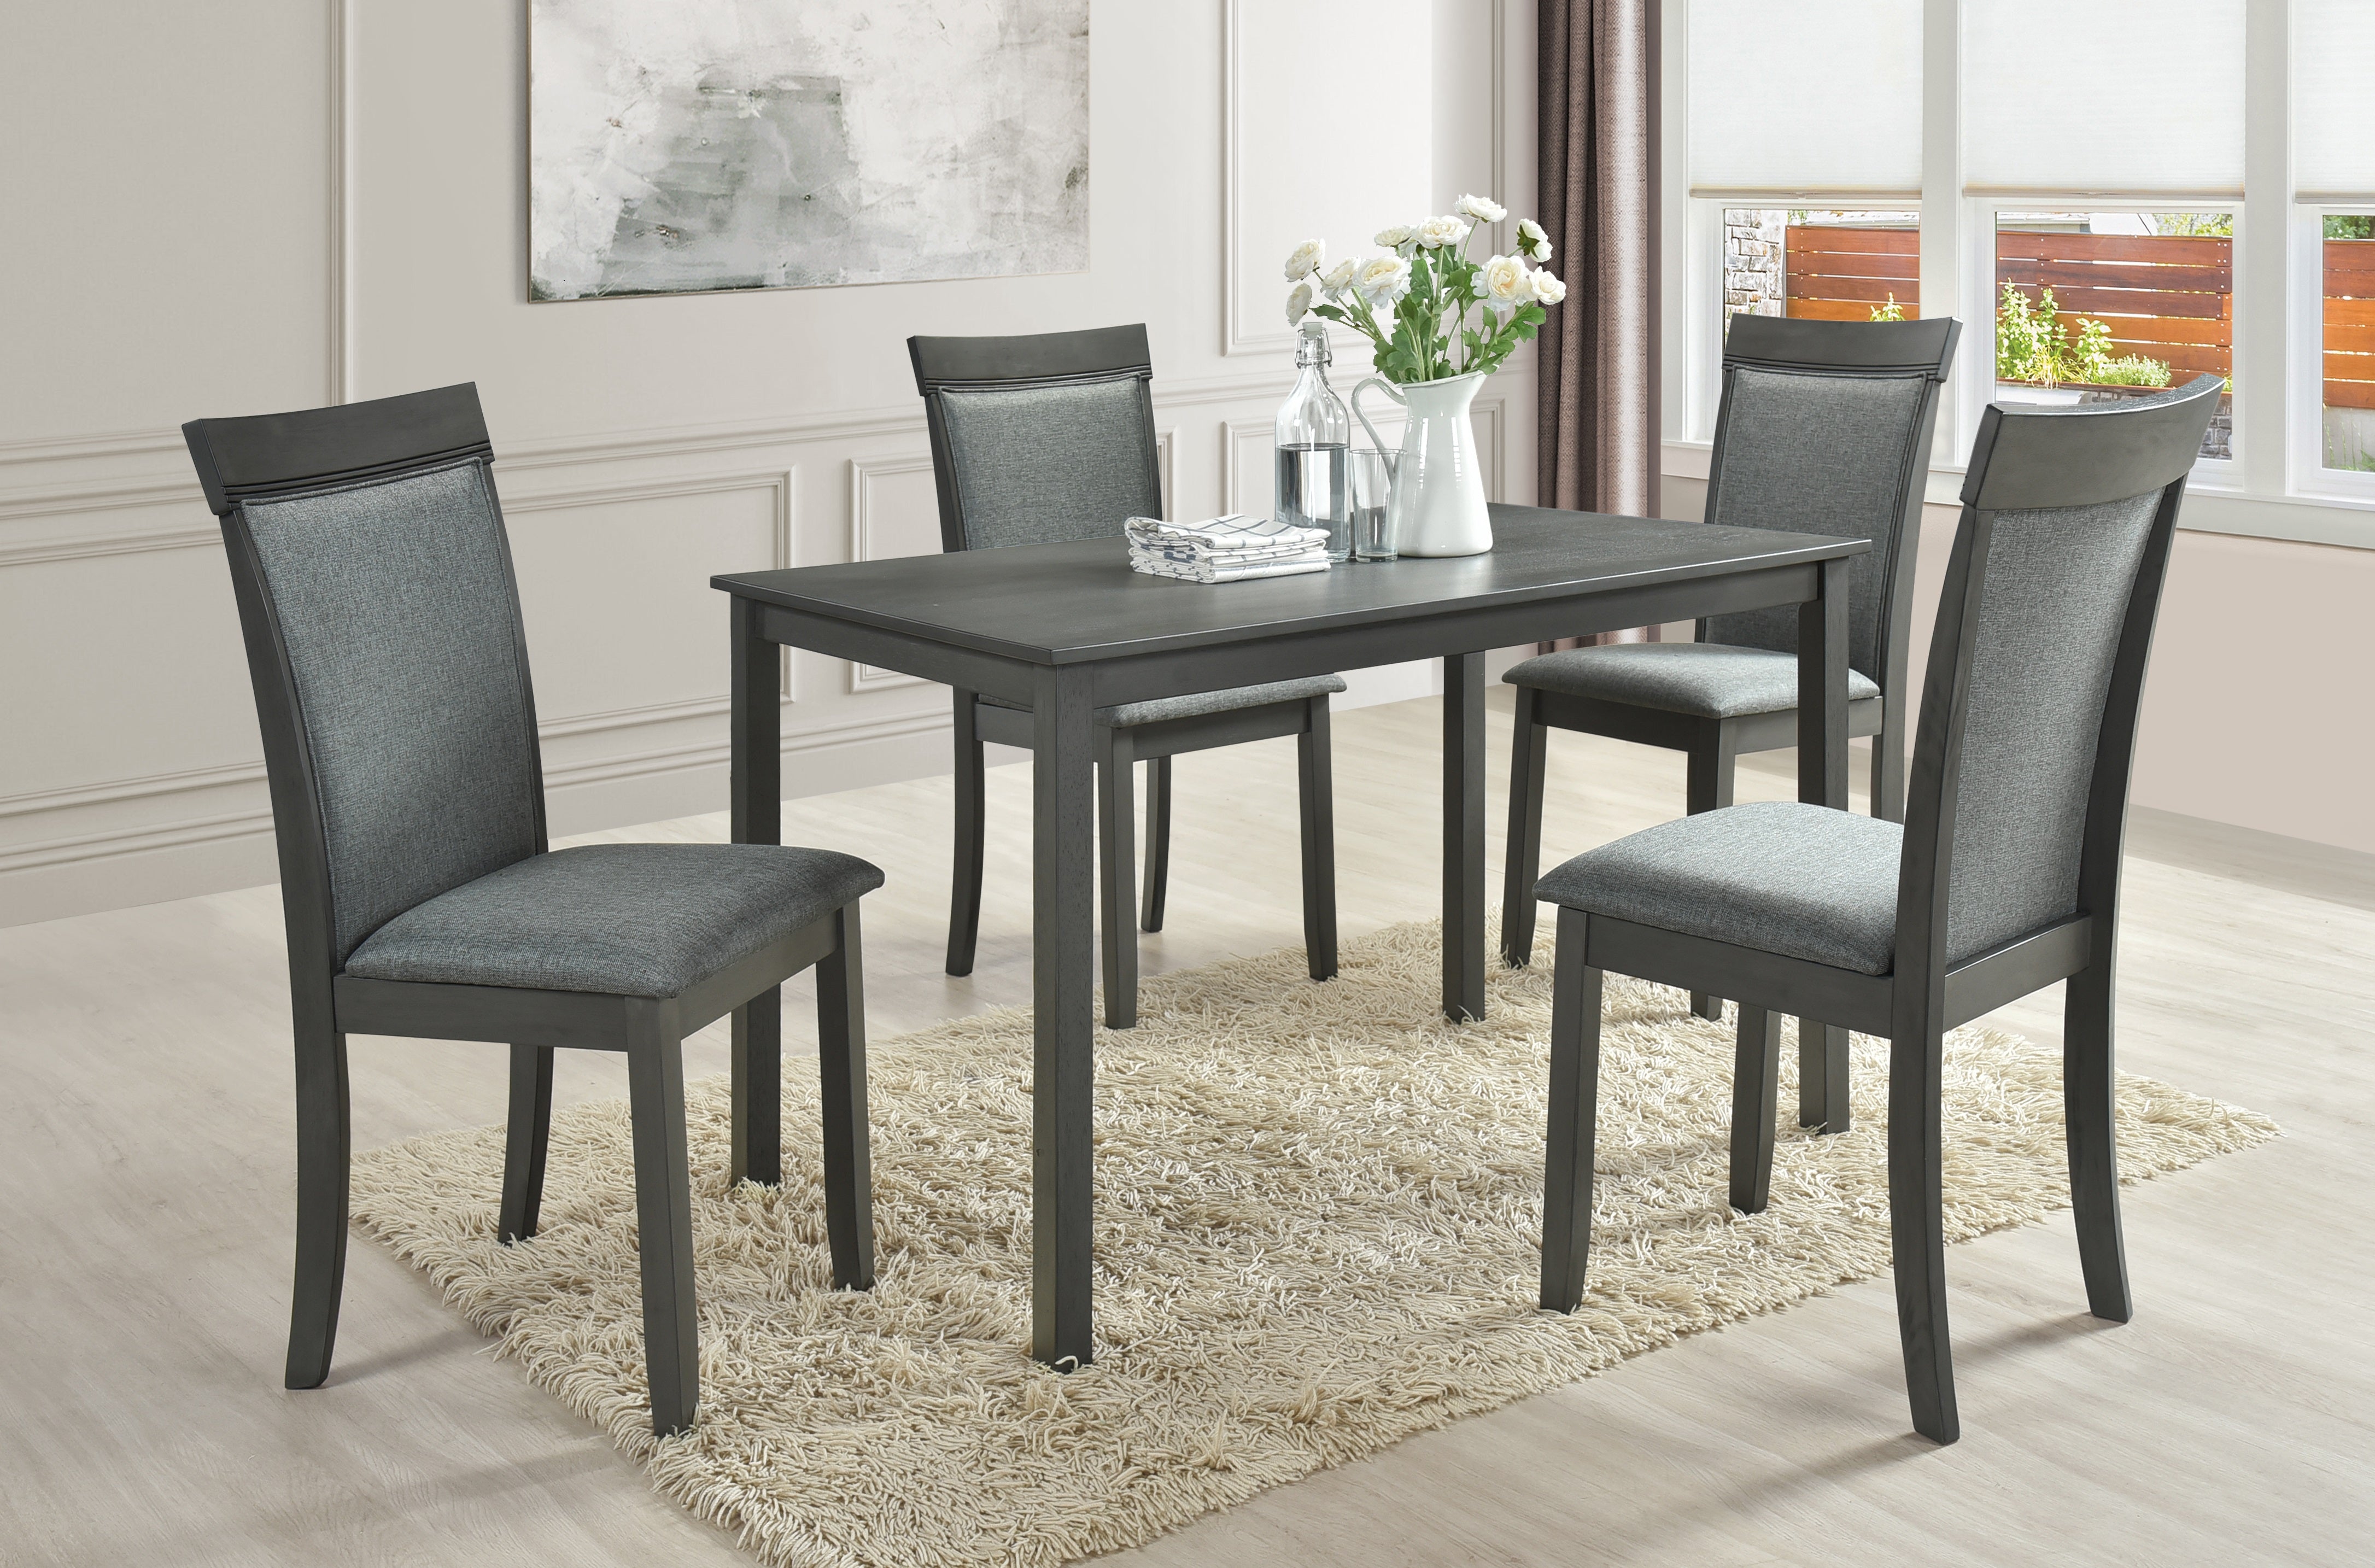 Cody - Table & 4 Chairs in Grey by Minhas Furniture